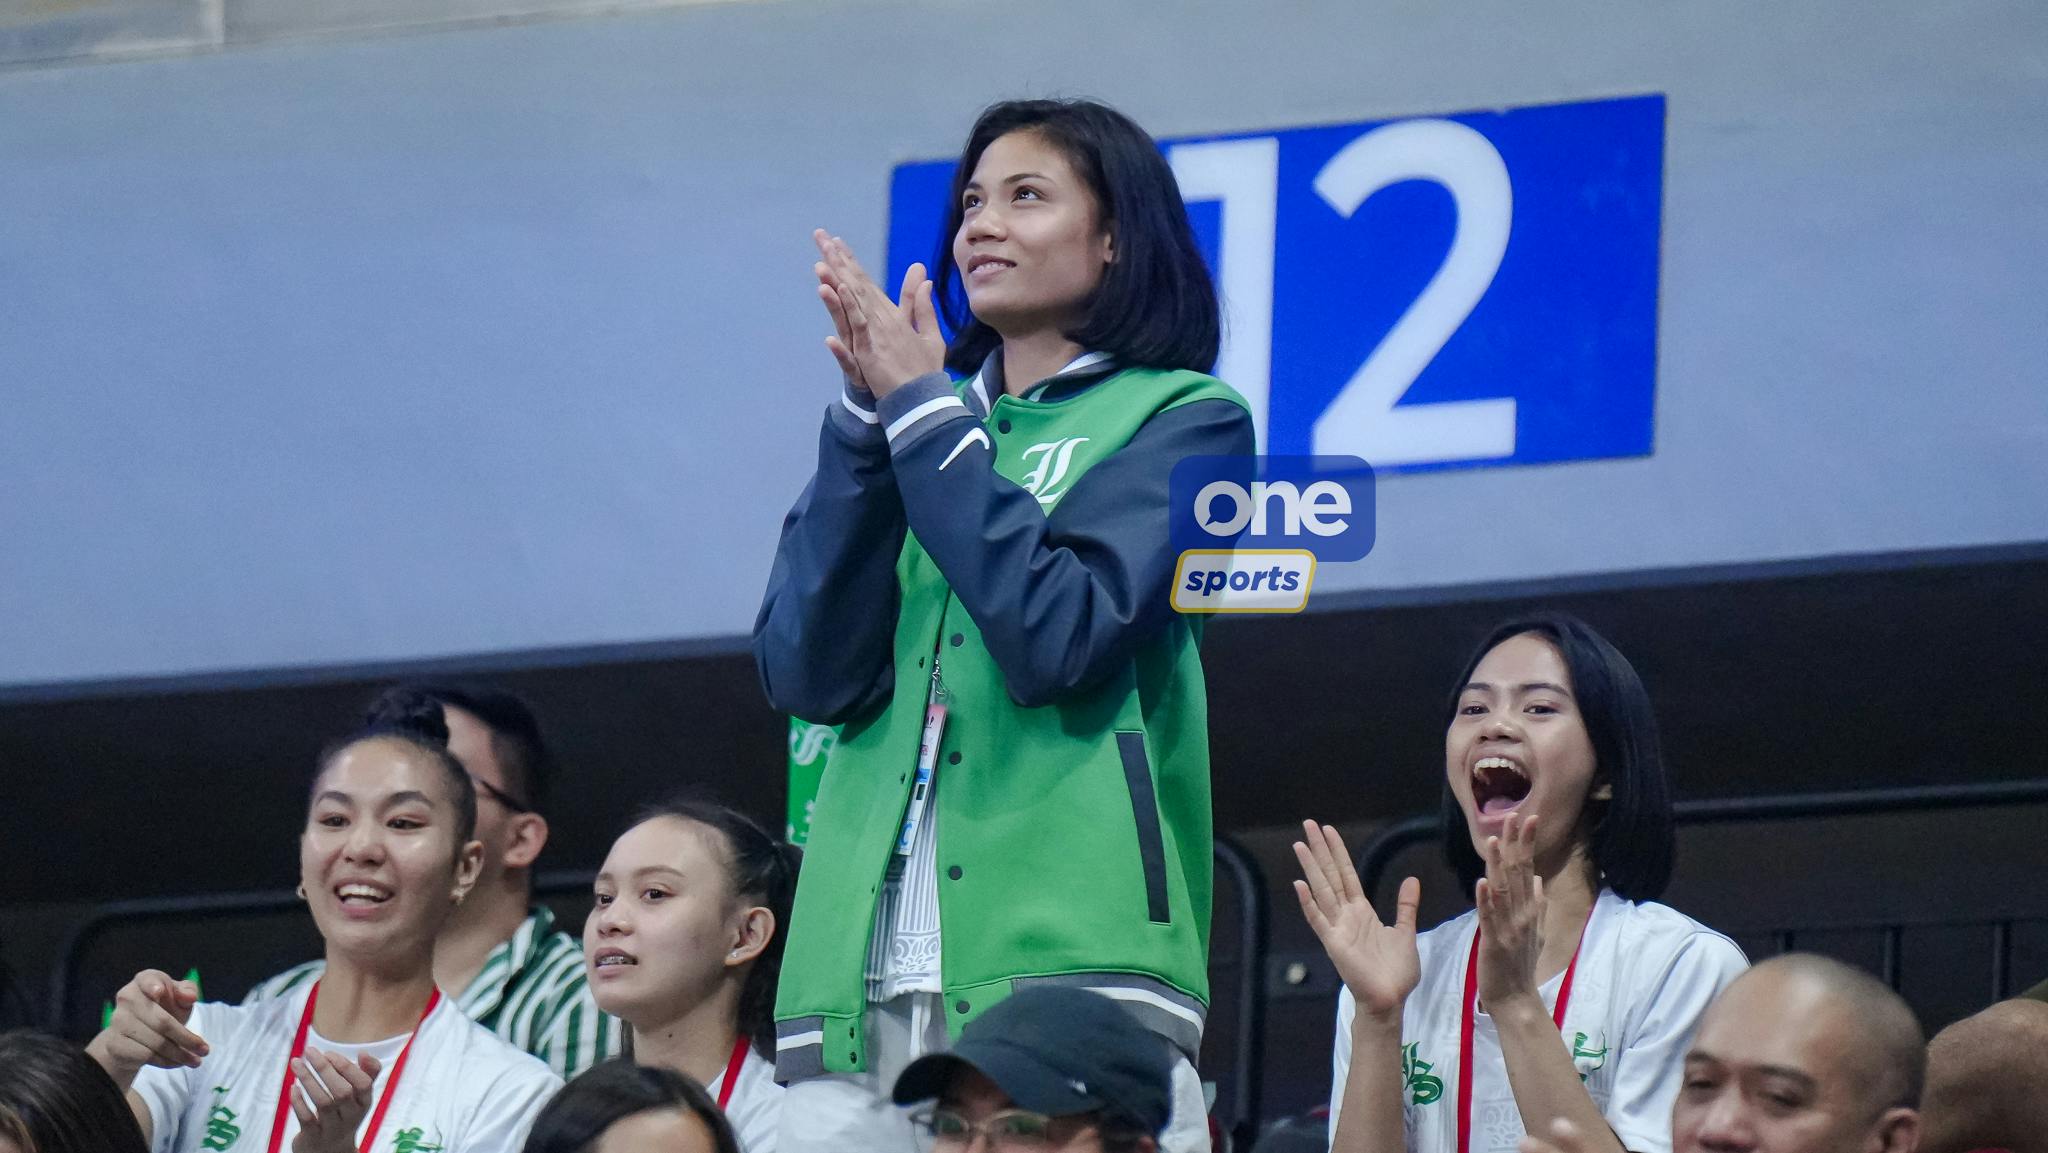 Will Angel Canino play against NU? Reigning UAAP MVP spotted without arm sling and cast while supporting Green Spikers